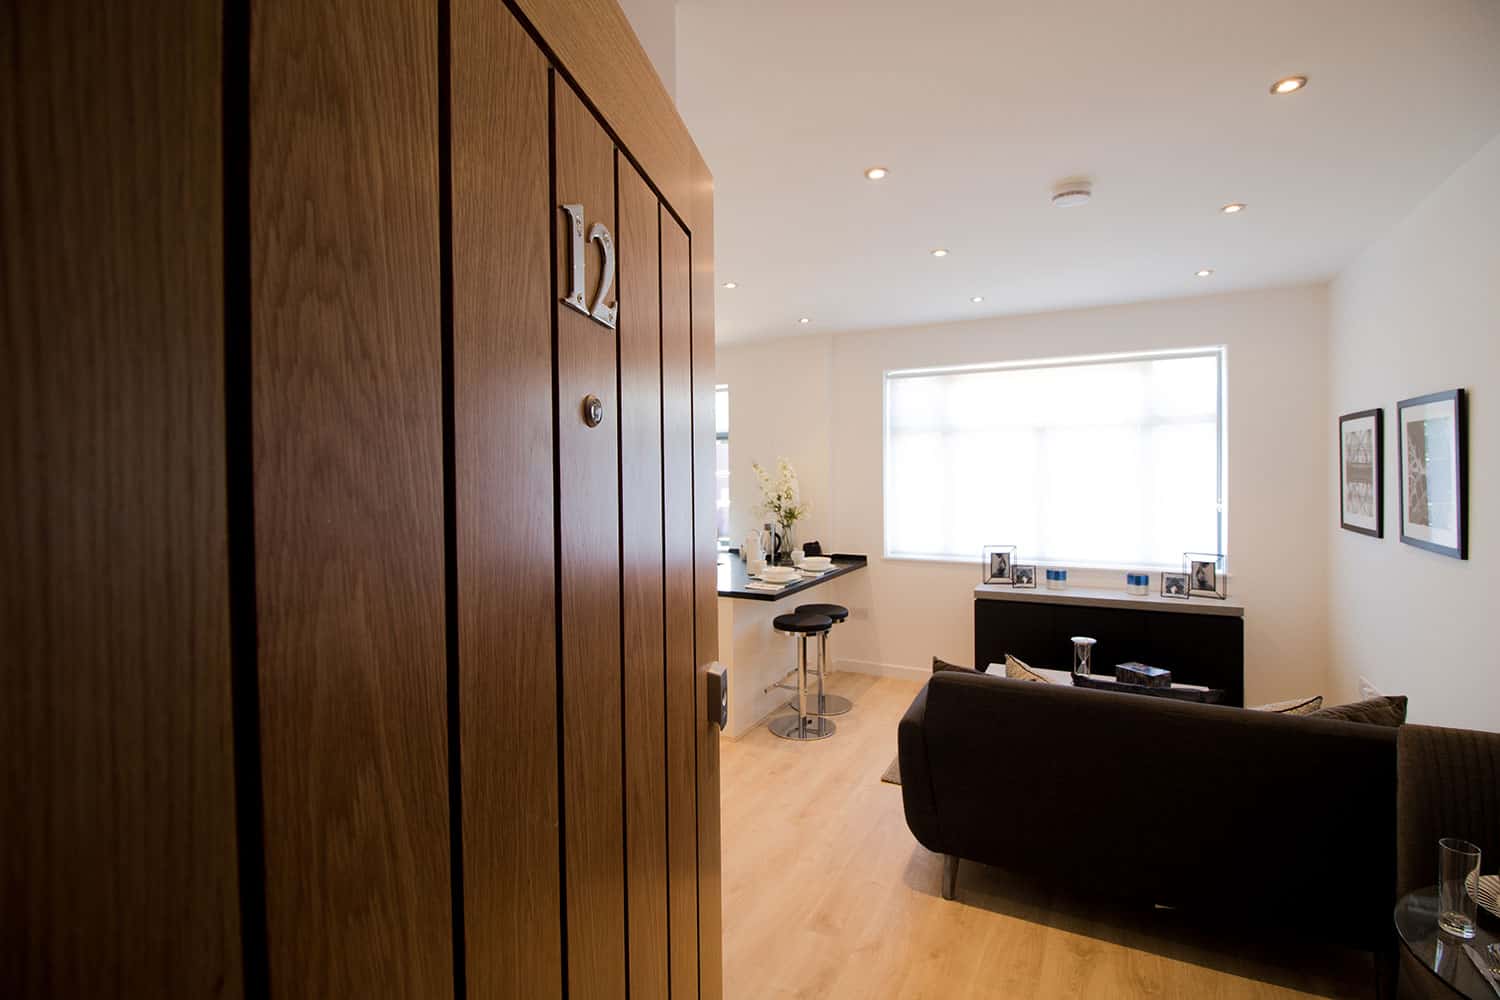 Normandy House Hemel Hempstead​ Interior: Commercial to Residential Property Conversion Apartment